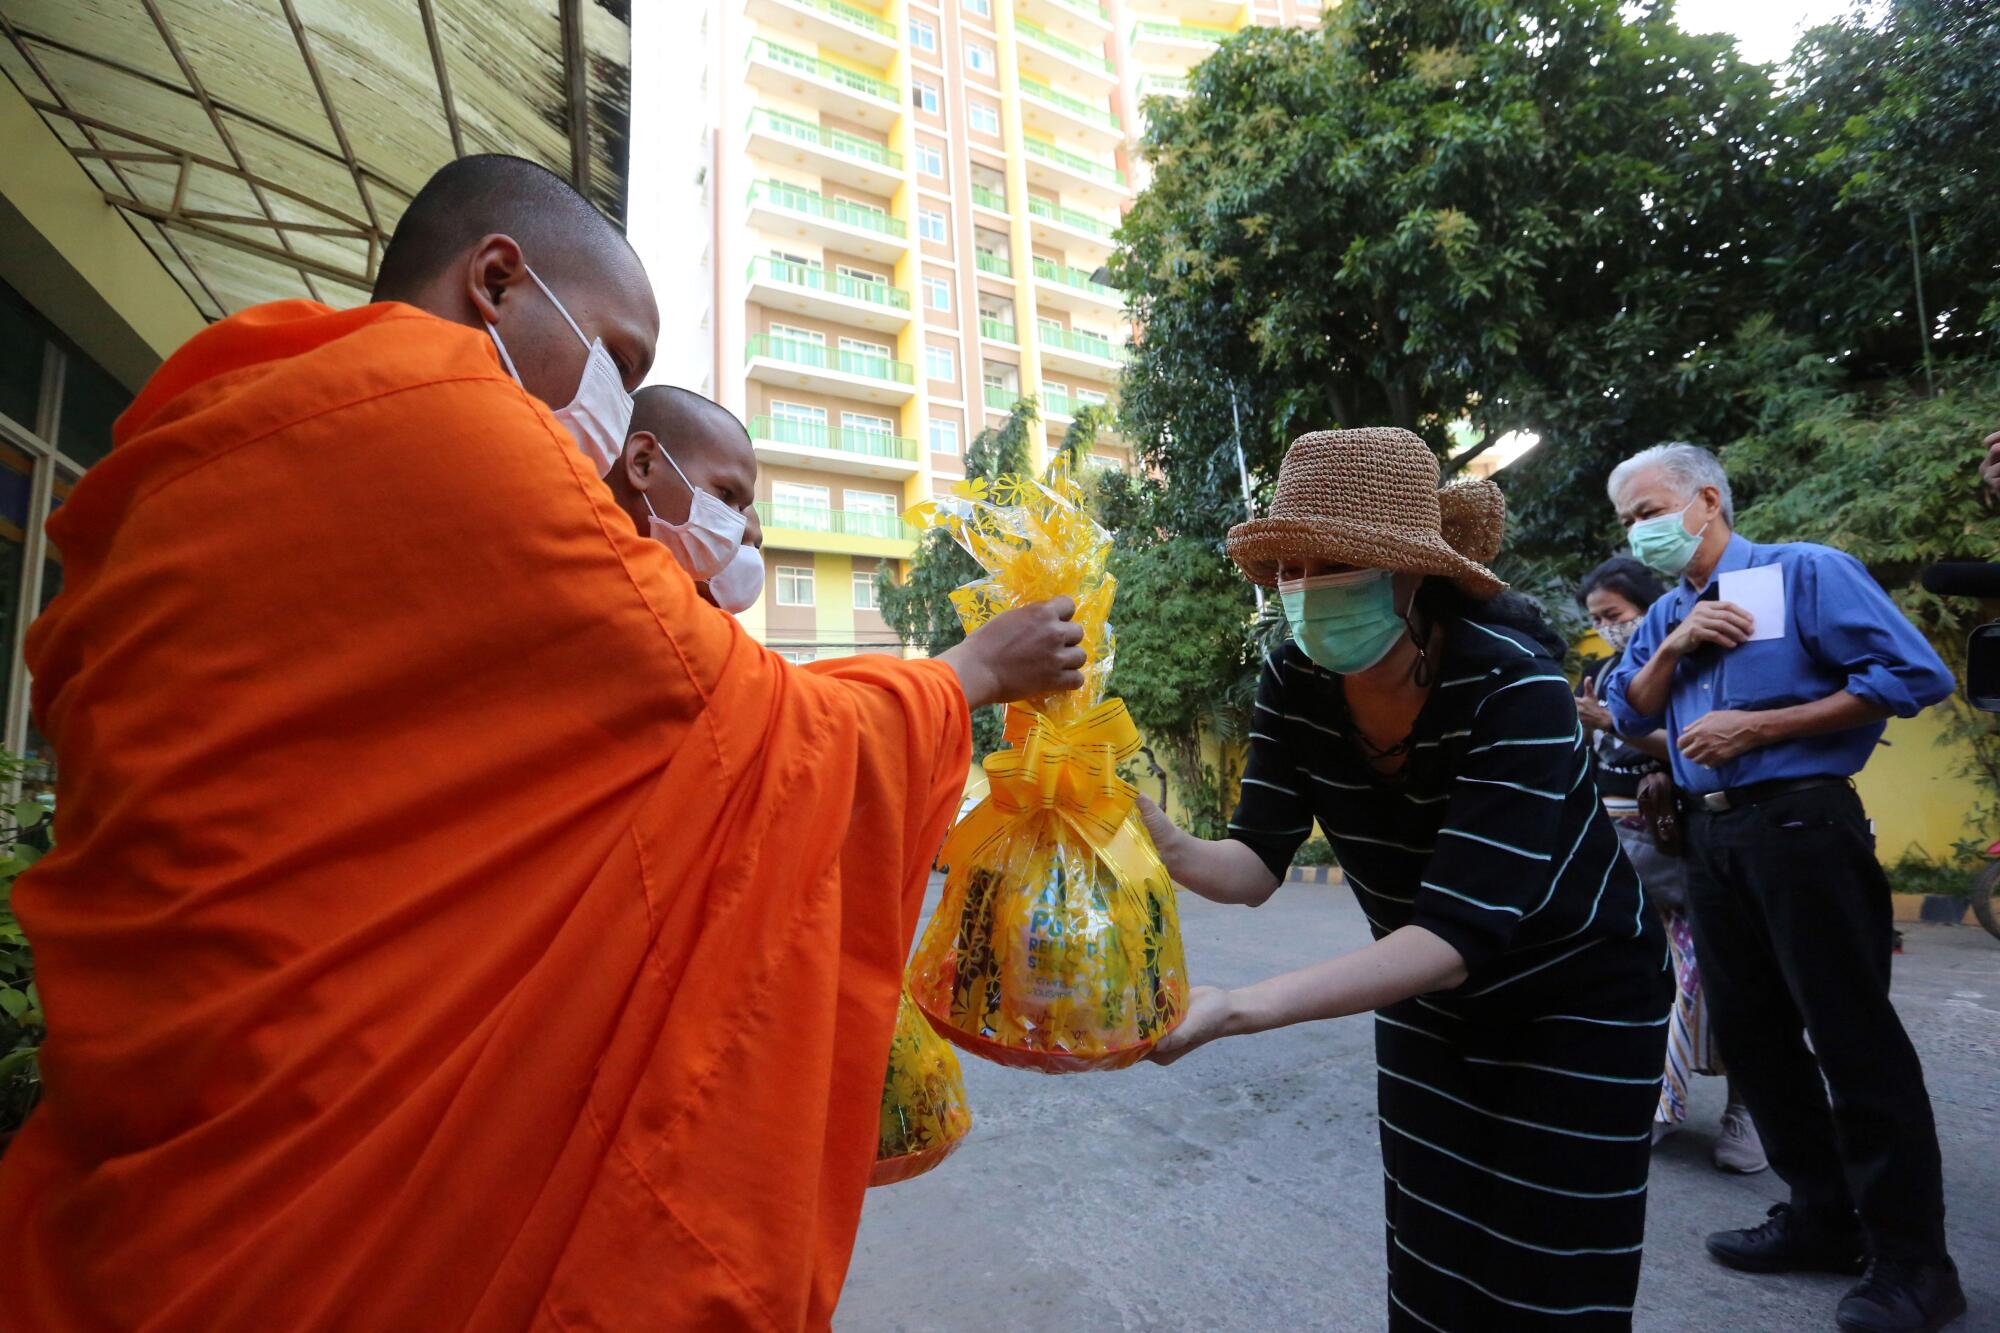 Sitanan Satsaksit hands an offering to a monk at the site of her brother's disappearance